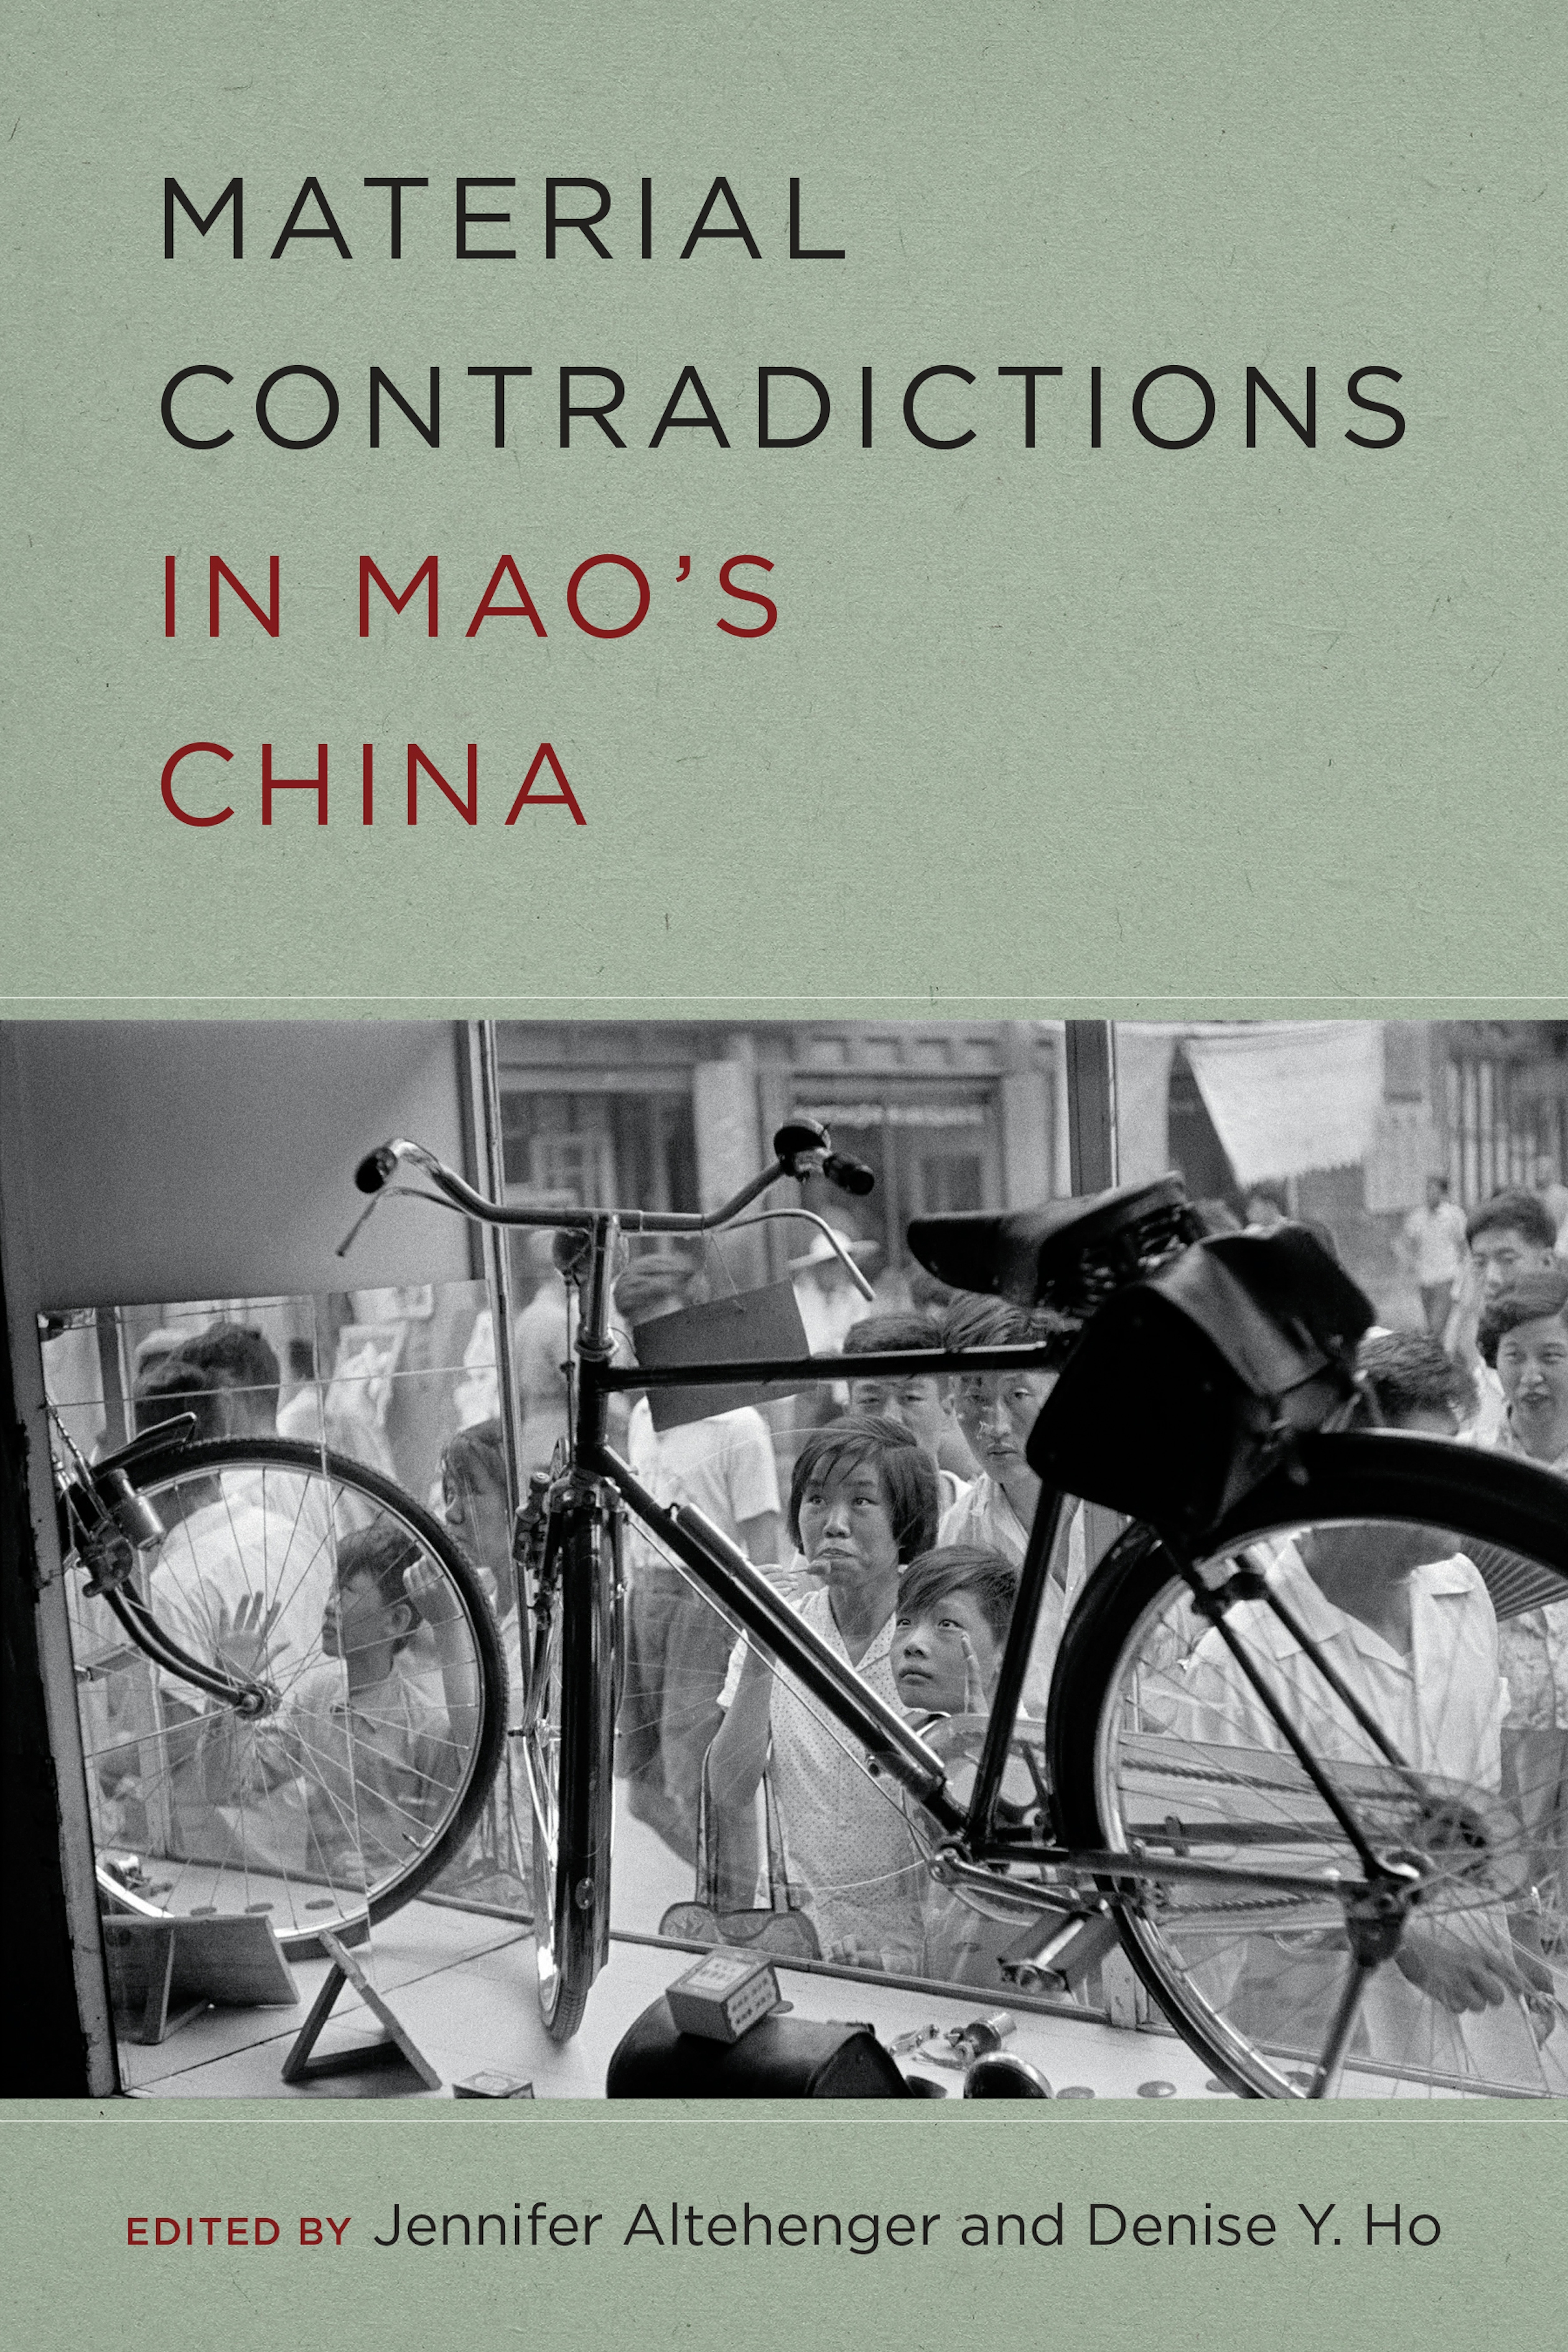 Material Contradictions in Mao